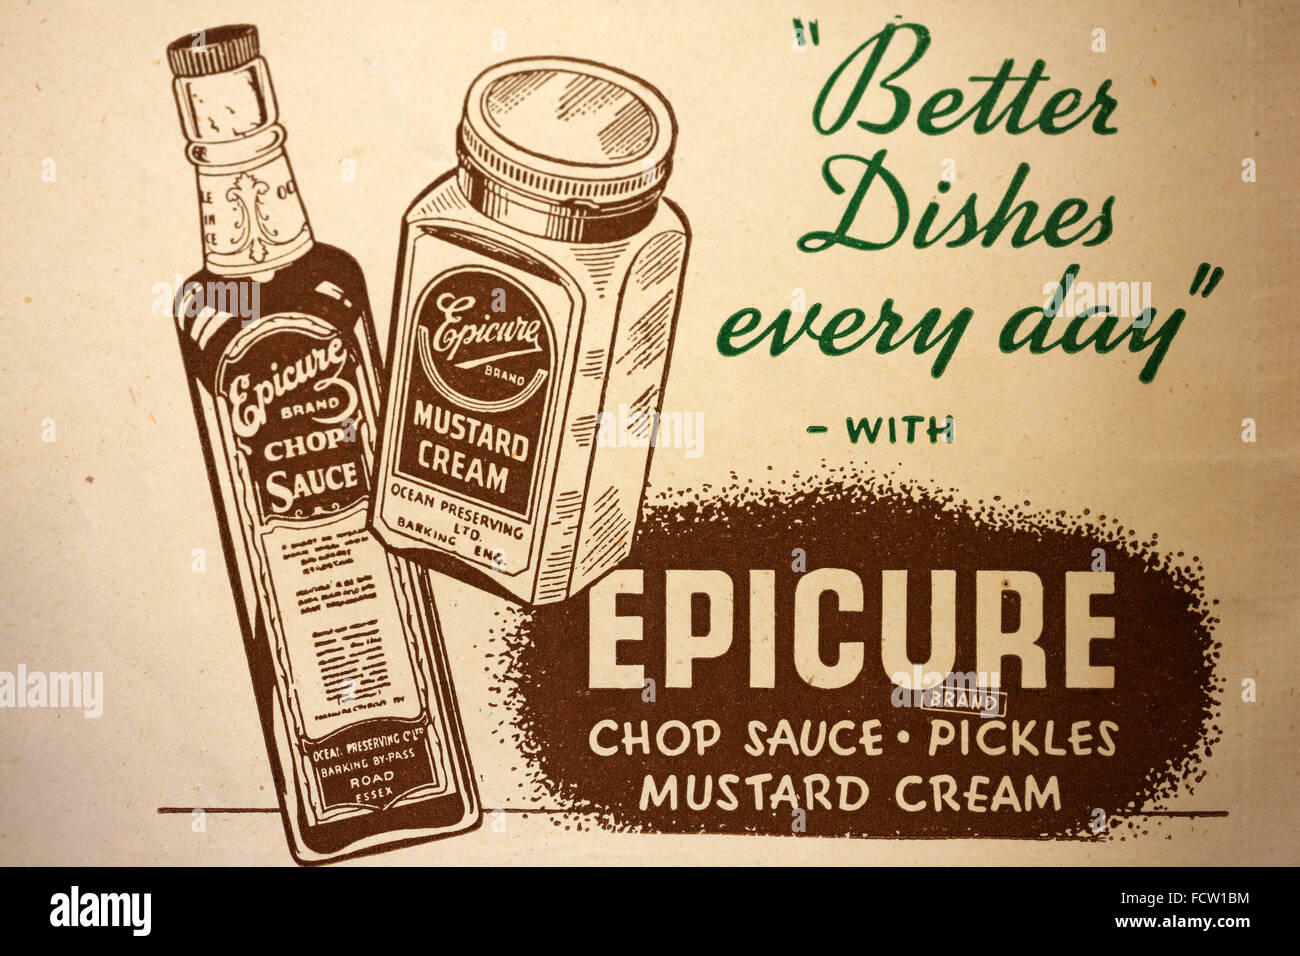 Vintage advert for Epicure chop sauce and mustard cream Stock Photo